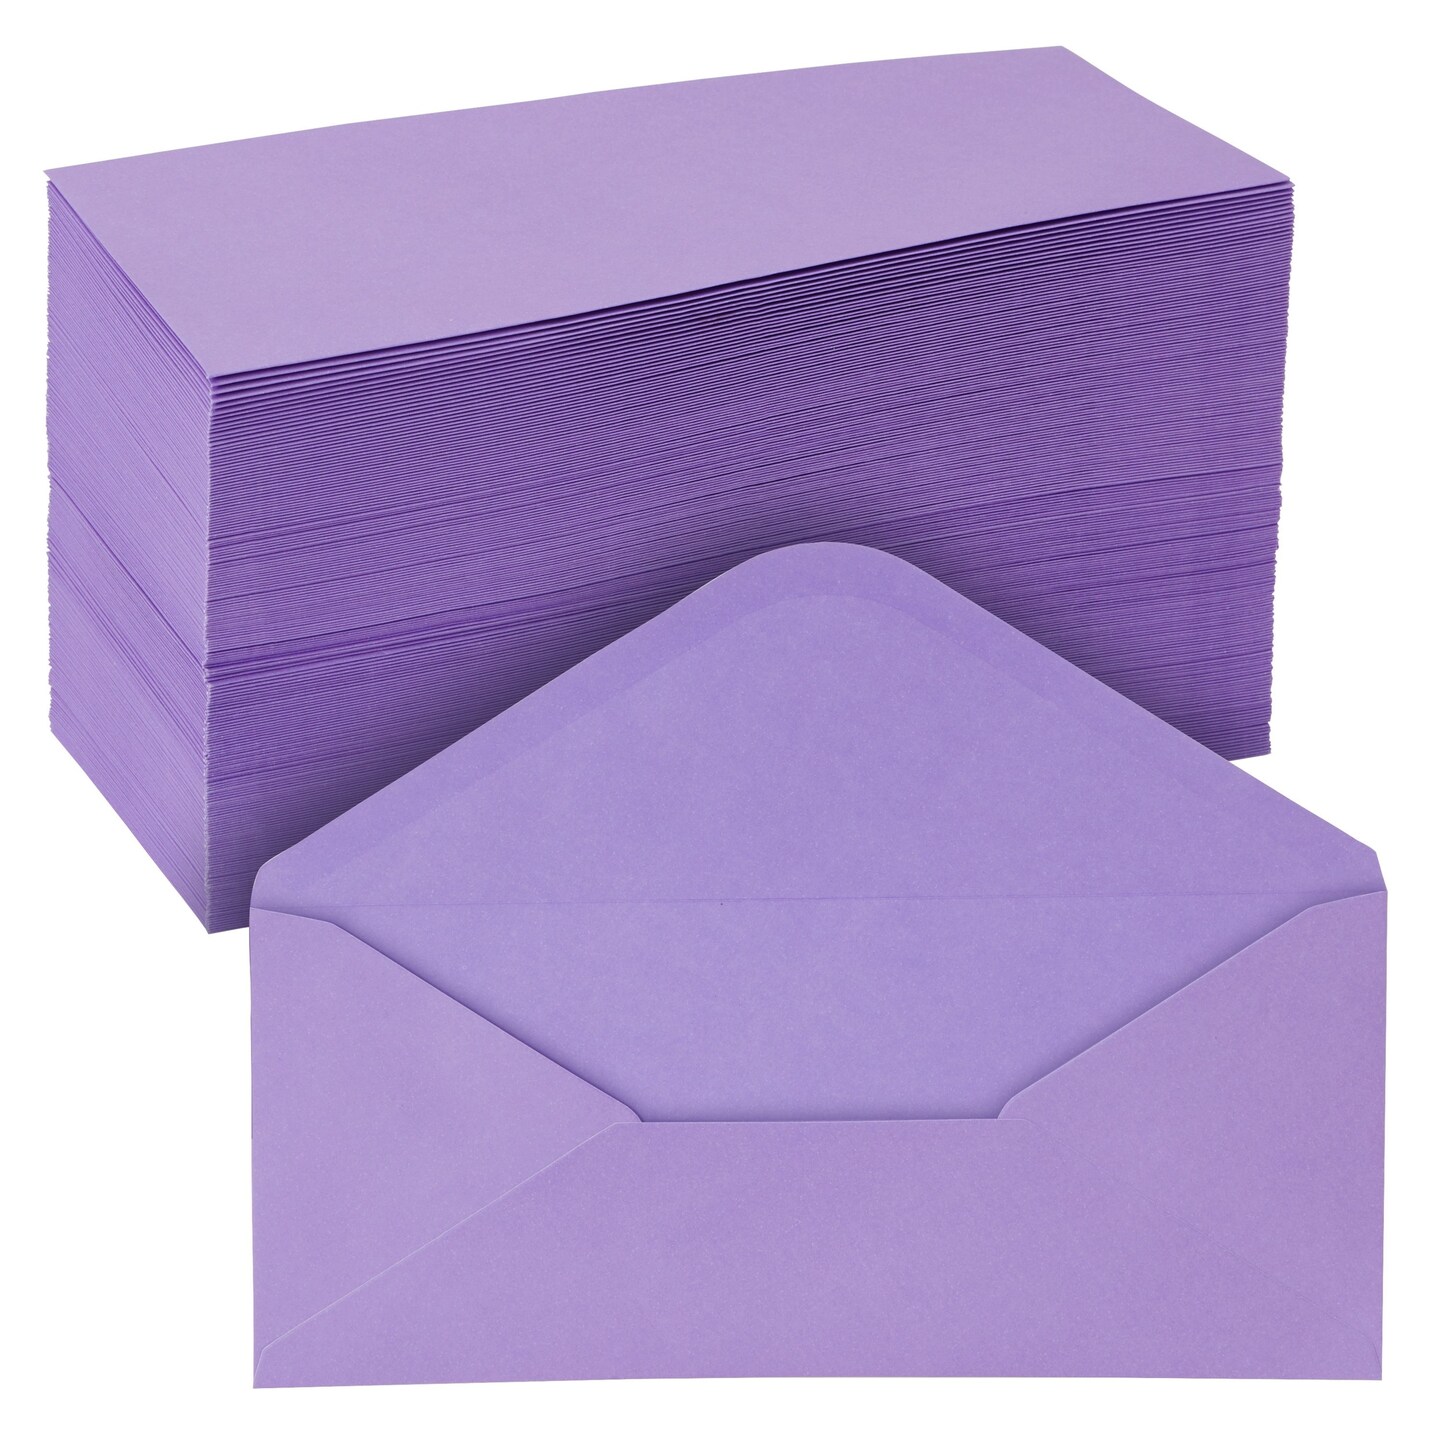 200 Pack Bulk #10 Purple Envelopes with Gummed Seal, Business Size for Invitations, Mailing Letters, Checks, Greeting Cards (4-1/8 x 9-1/2 In)